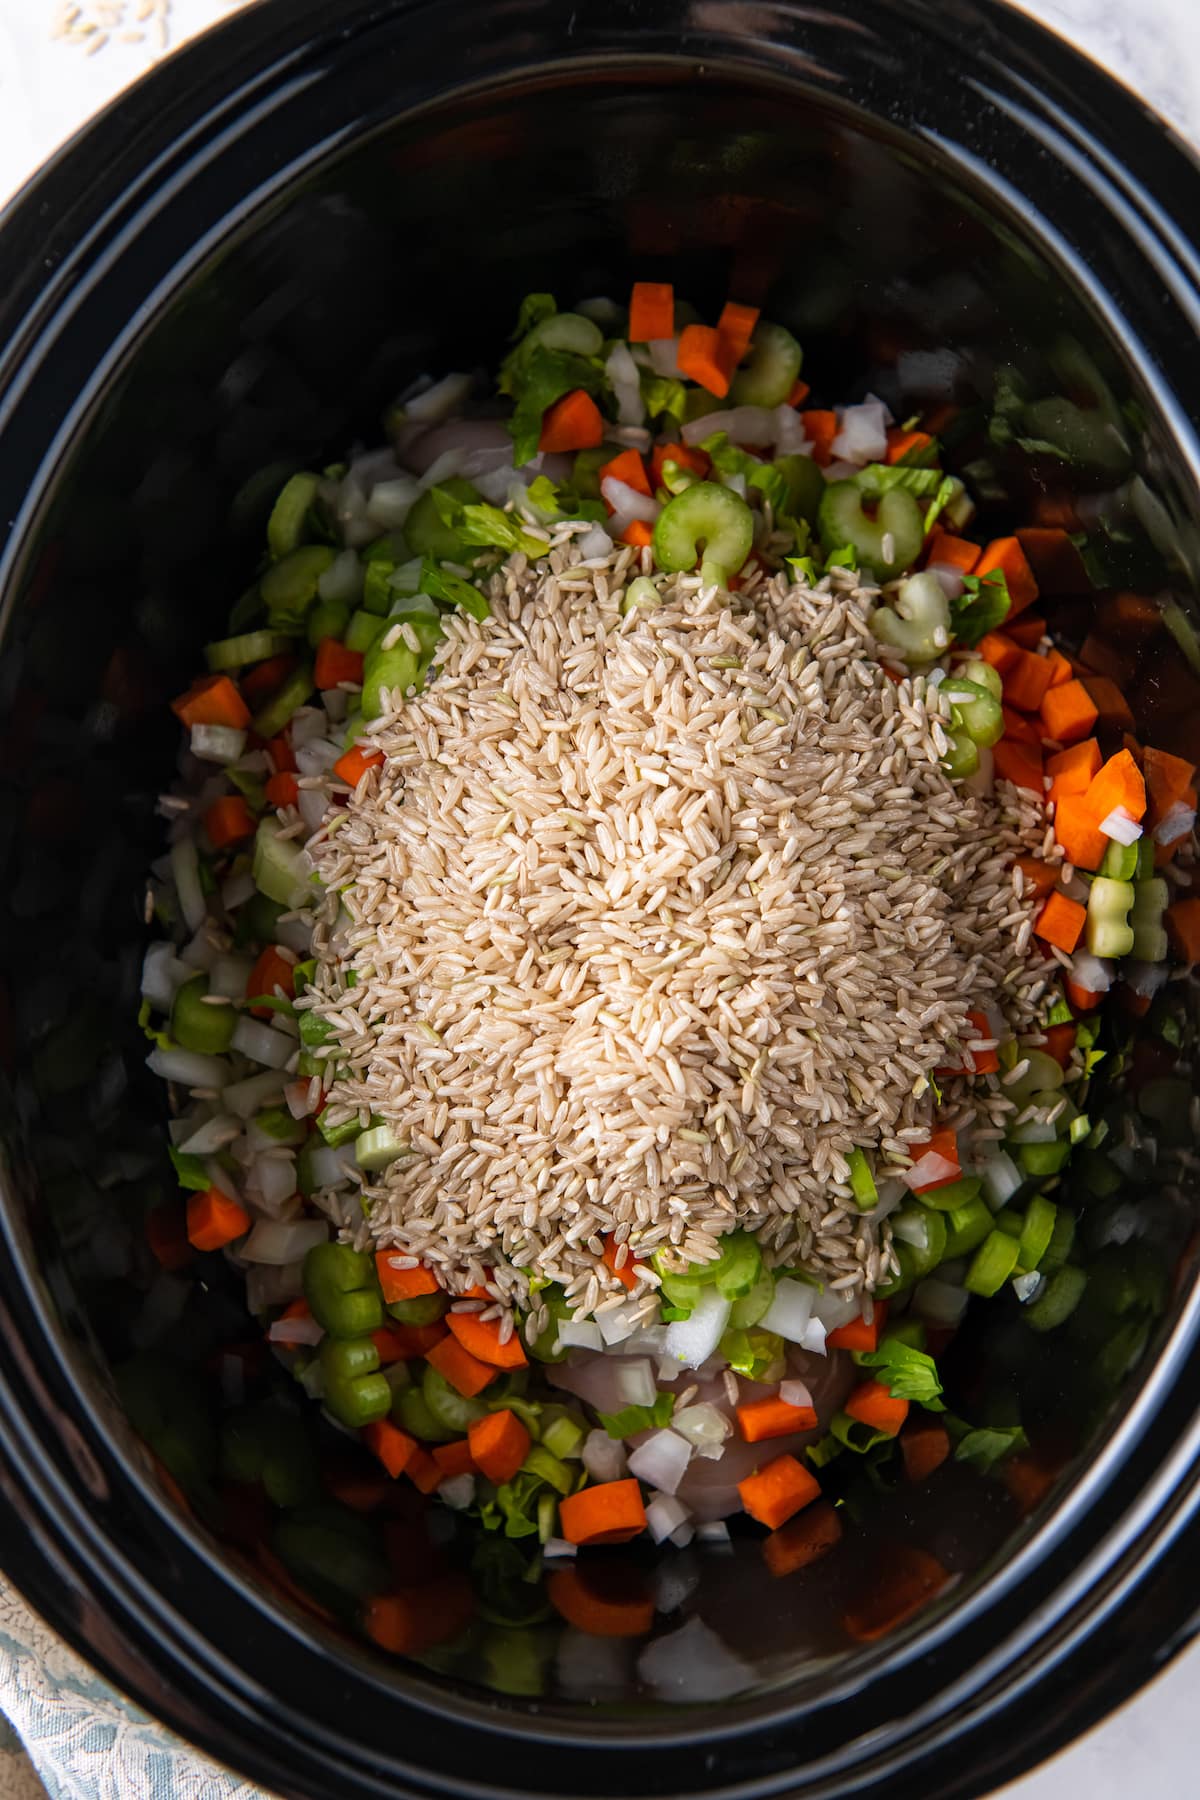 rice poured over diced vegetables in a crockpot